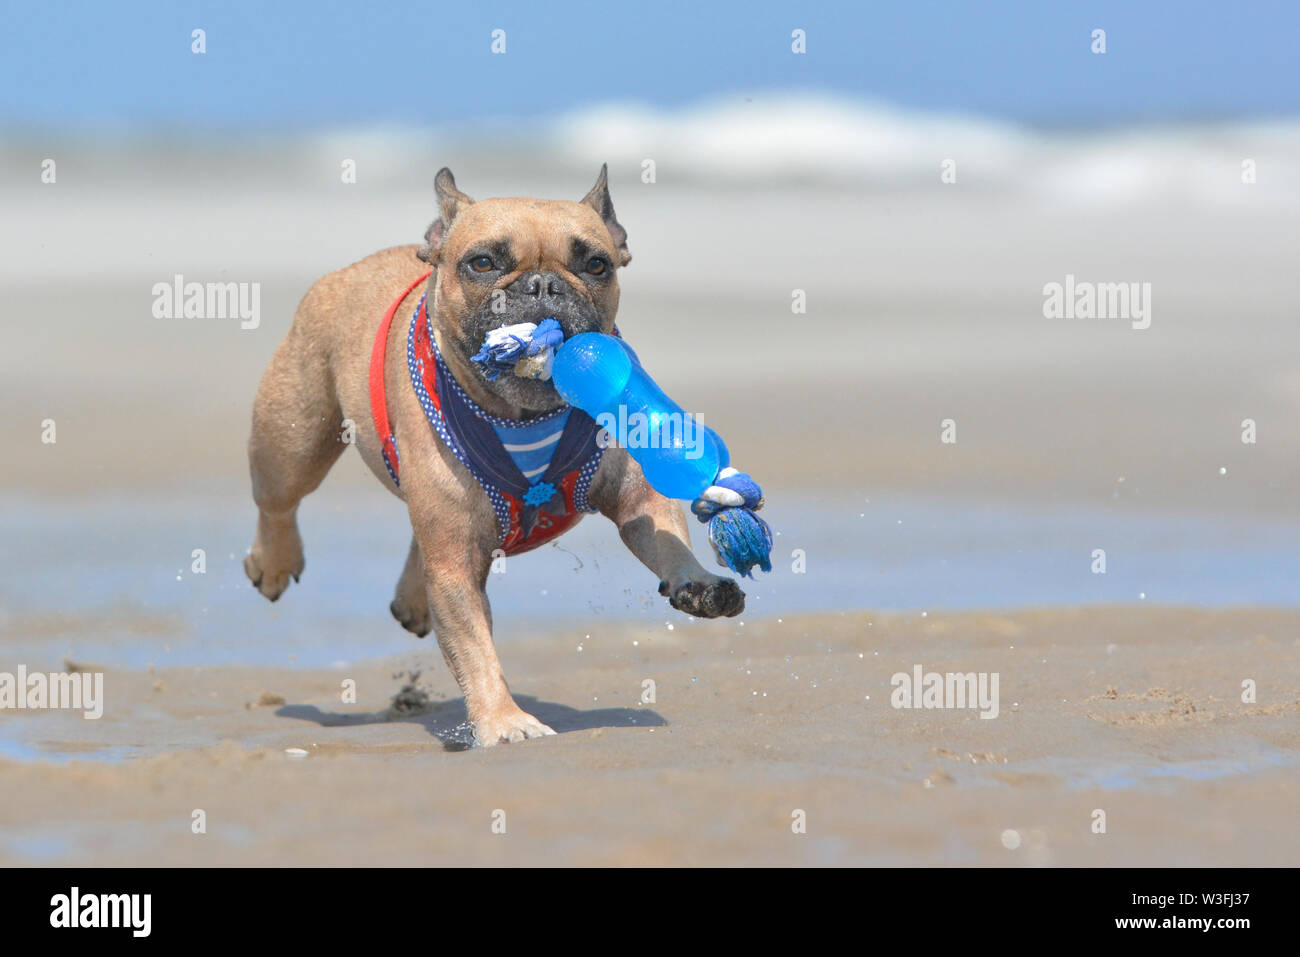 Small and cute brown French Bulldog dog with sailor harness carrying big blue toy in muzzle while playing fetch at the beach on holidays Stock Photo 